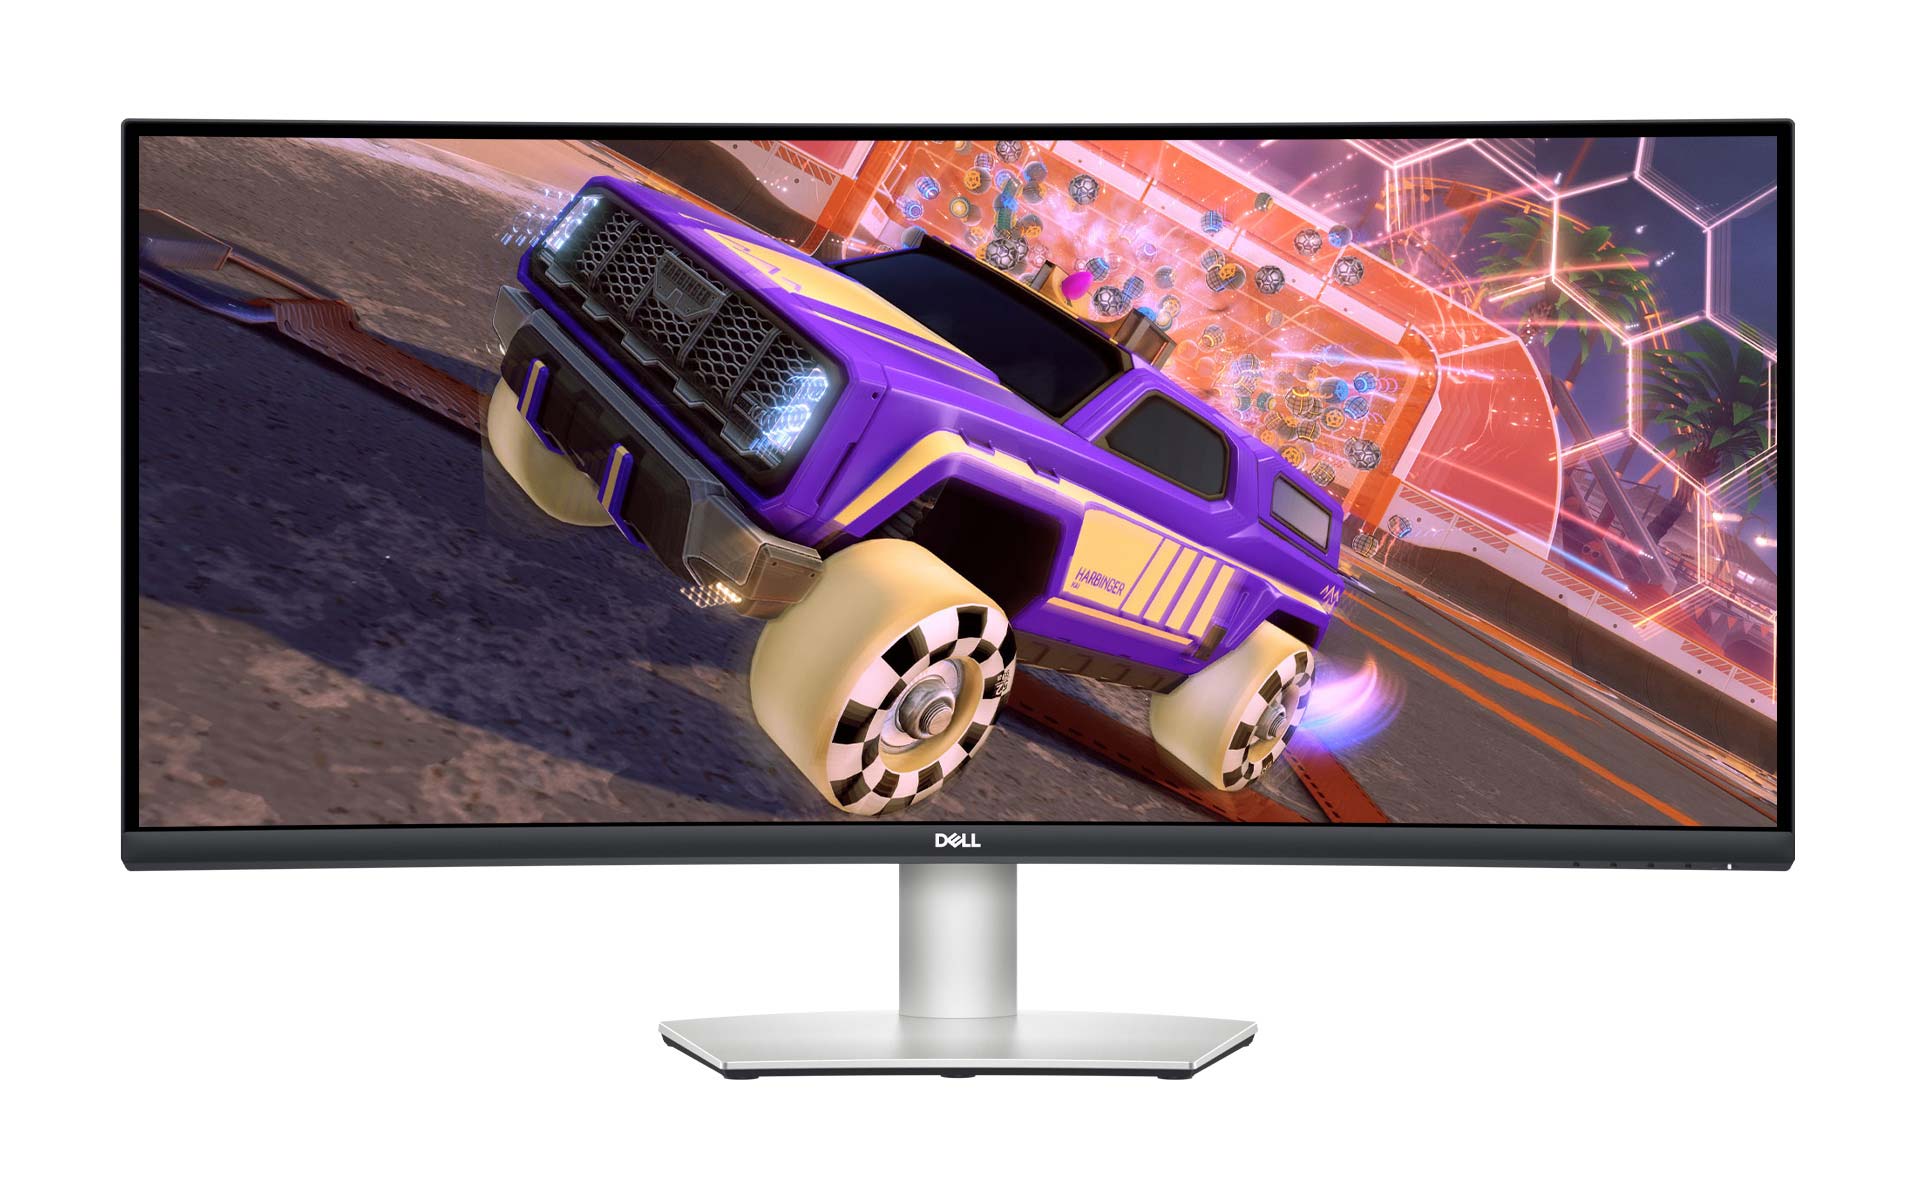 Dell 34 Curved Monitor S3422dw